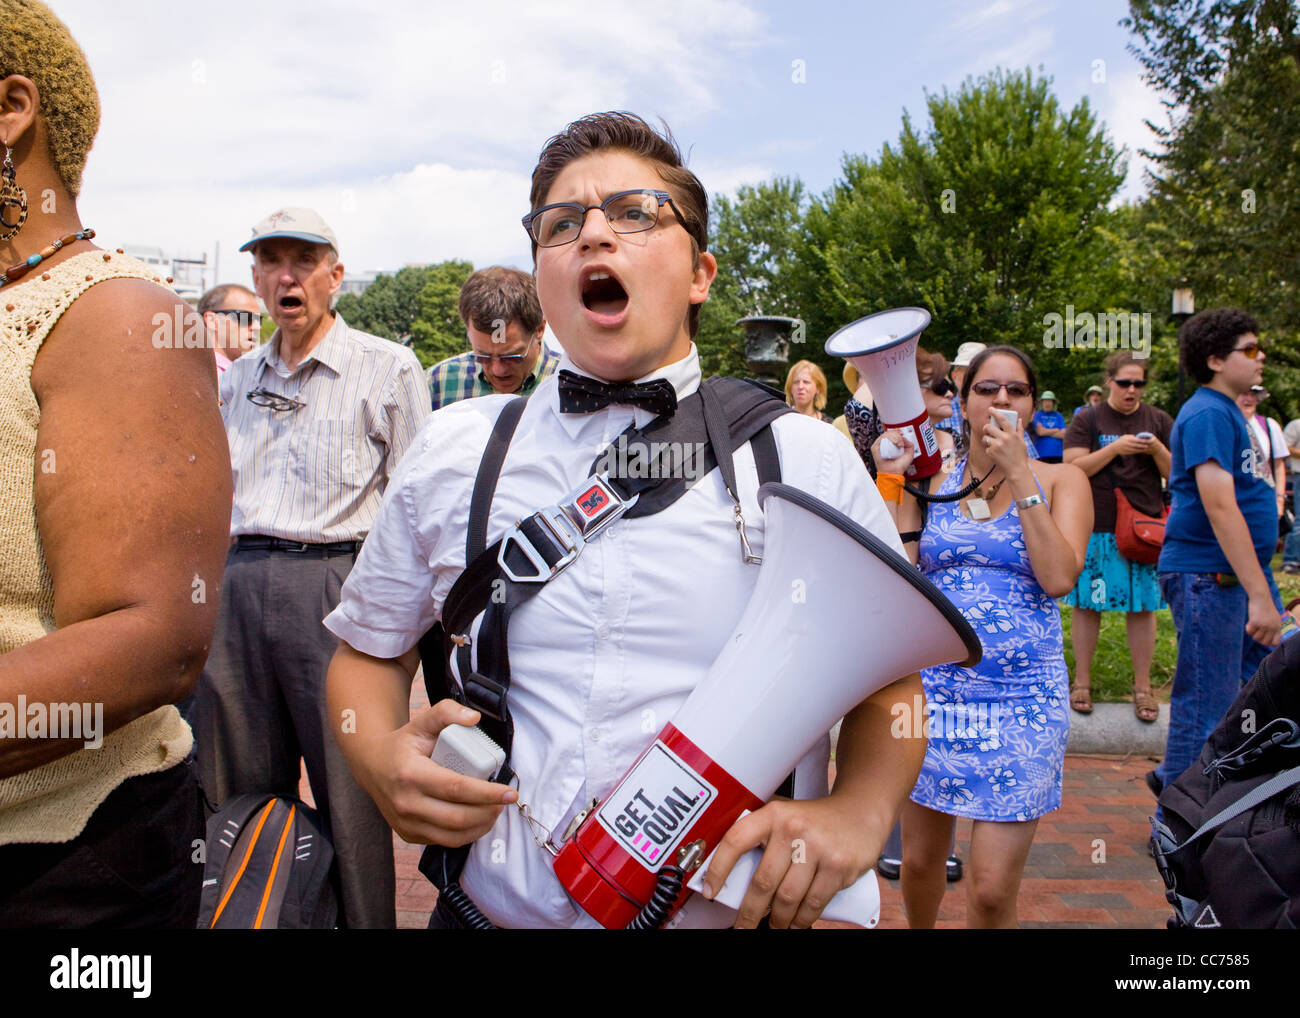 Protester with a bullhorn Stock Photo